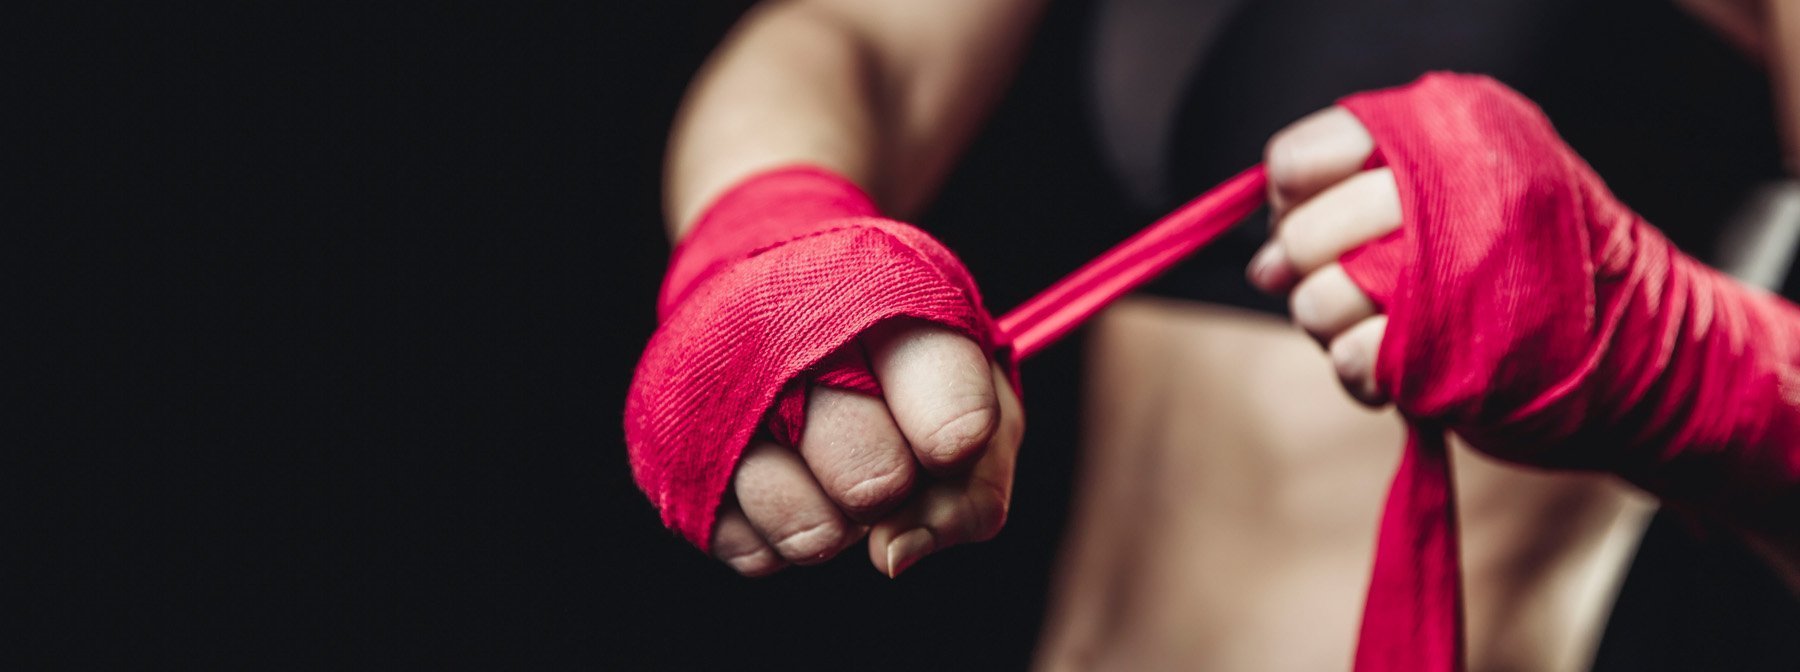 How to train Like An MMA Fighter | Athlete Guides